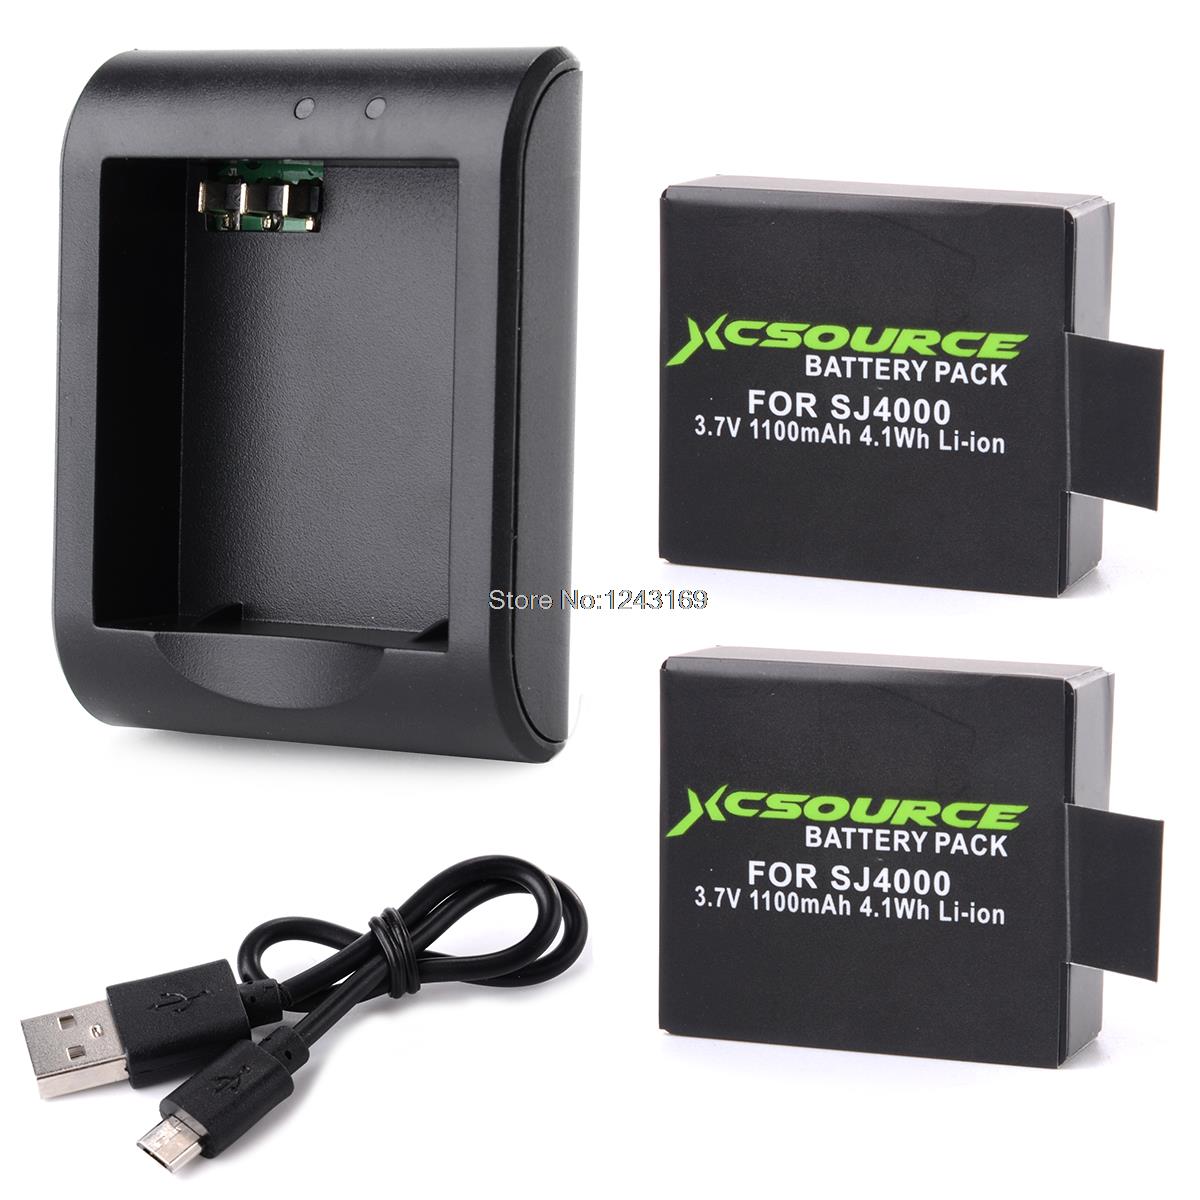 Xcsource Micro USB Charger 2x 1100mAh Lithium Digital Battery For SJ4000 Actiong Sport Camera BC426